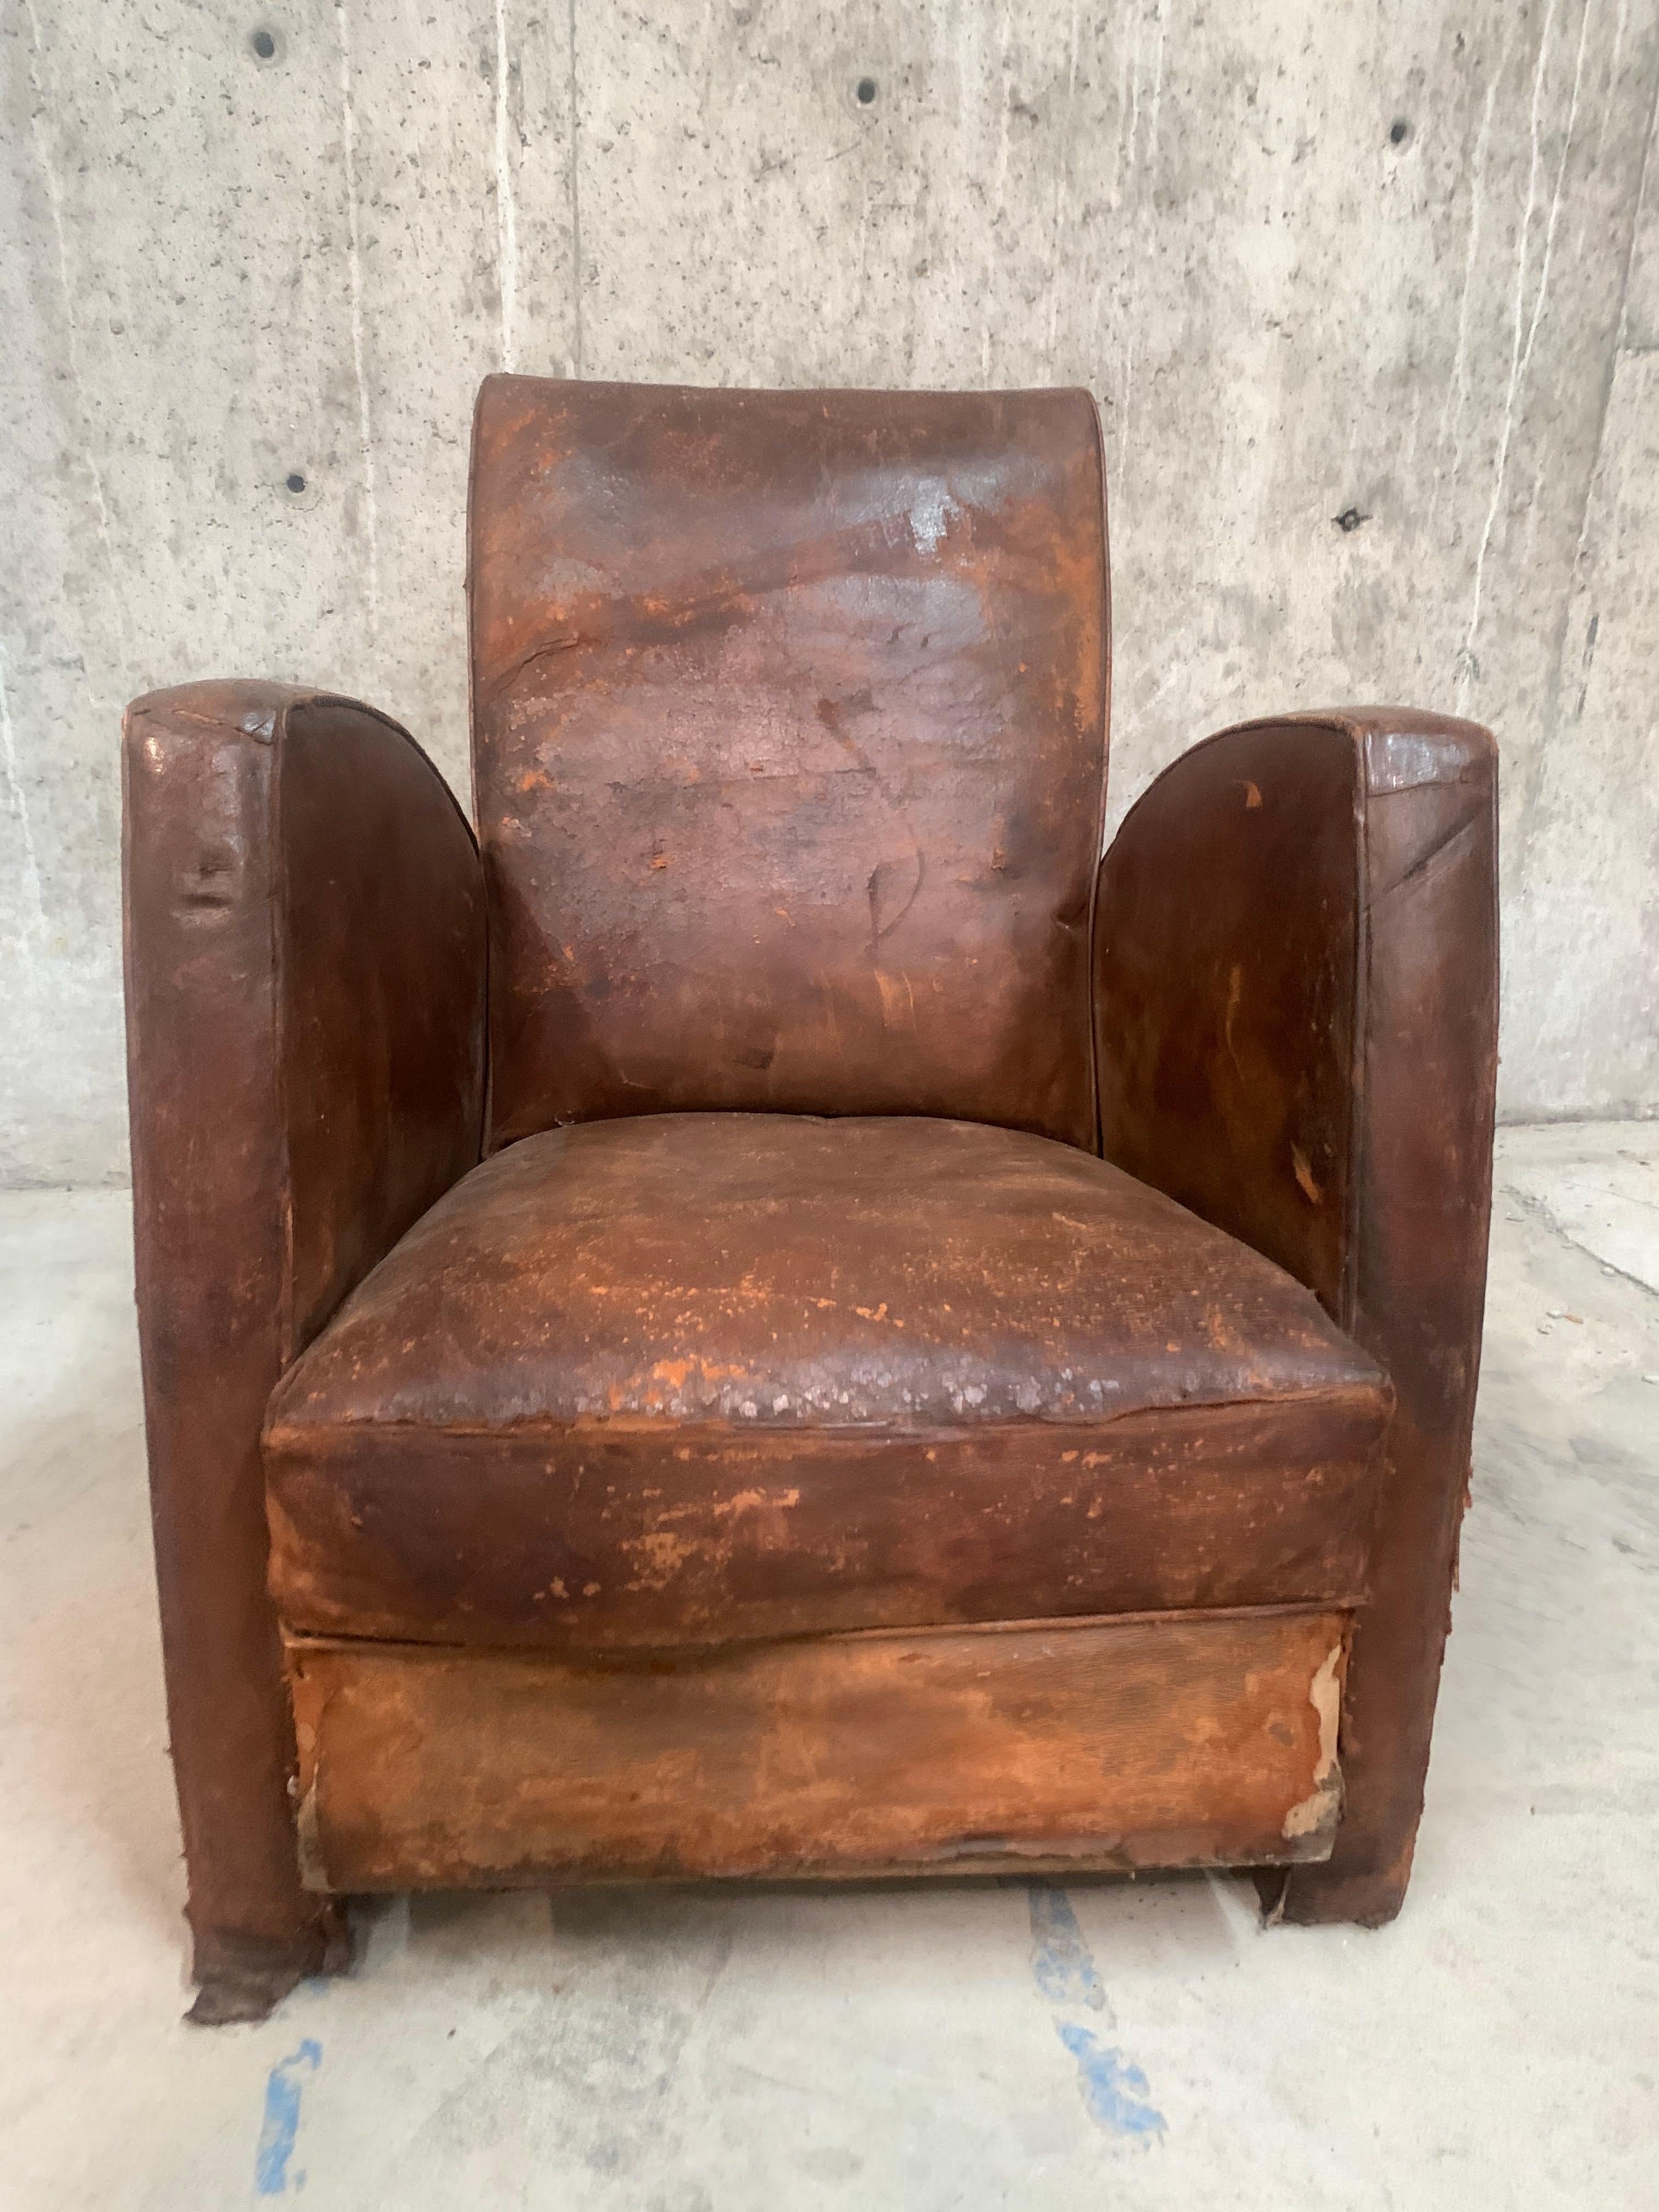 Vintage French Art Deco Leather Club Armchair In Distressed Condition For Sale In Sheridan, CO